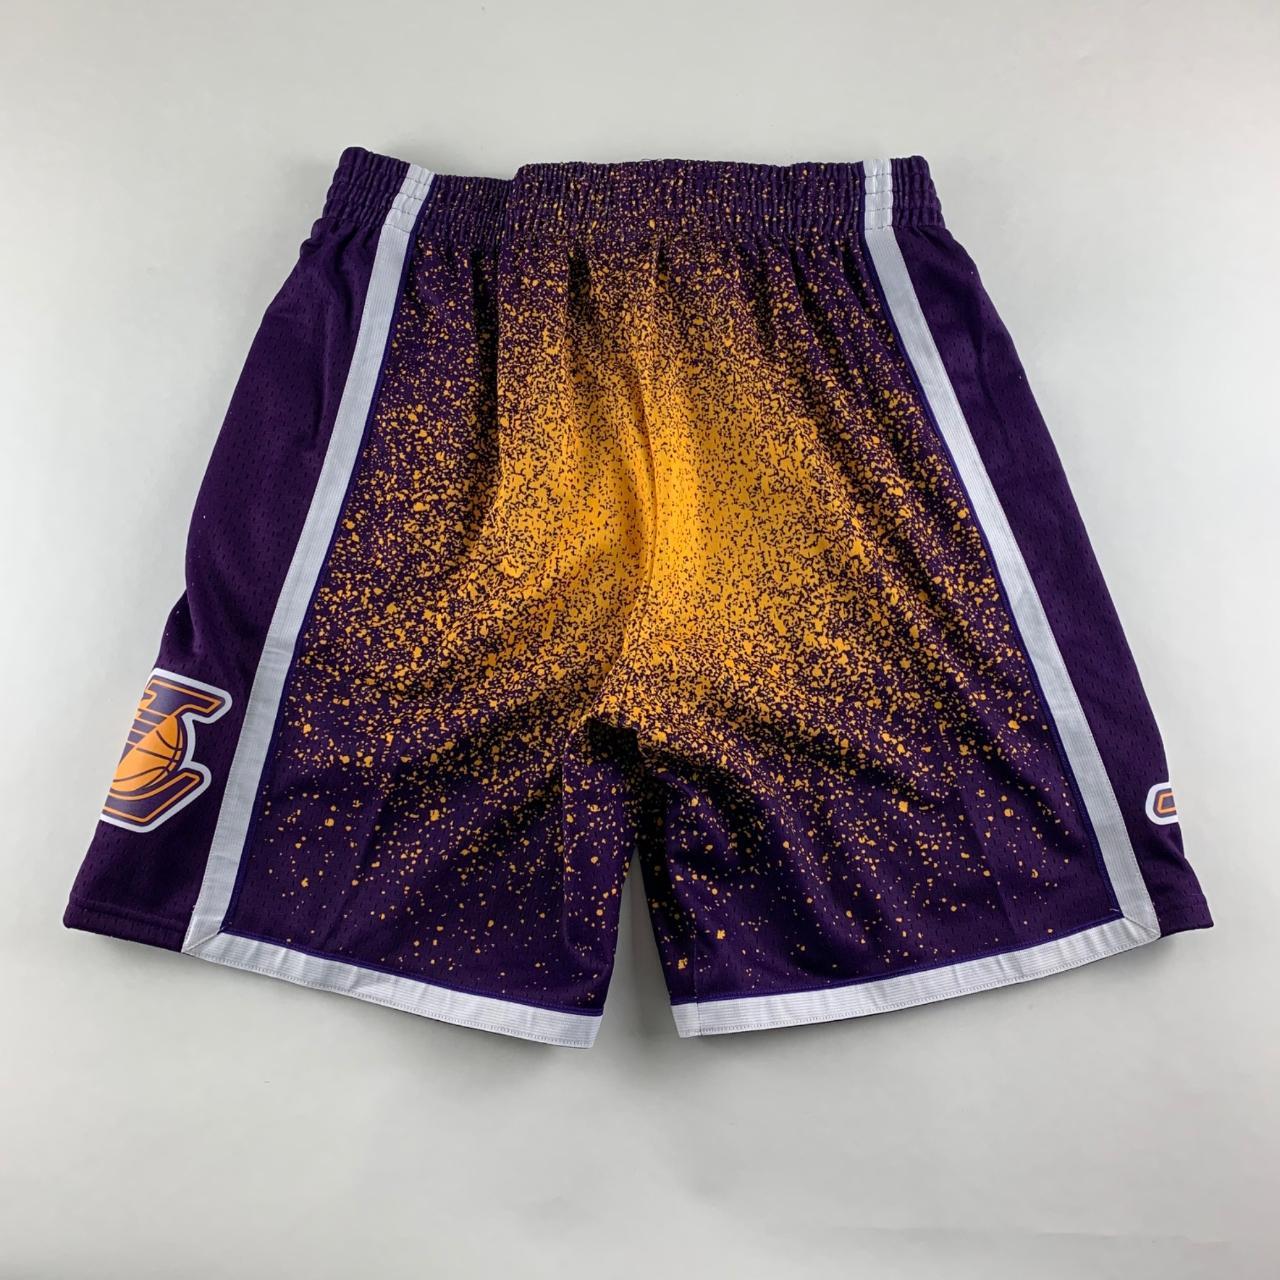 MITCHELL AND NESS - Vintage Lakers Shorts Size - - Depop